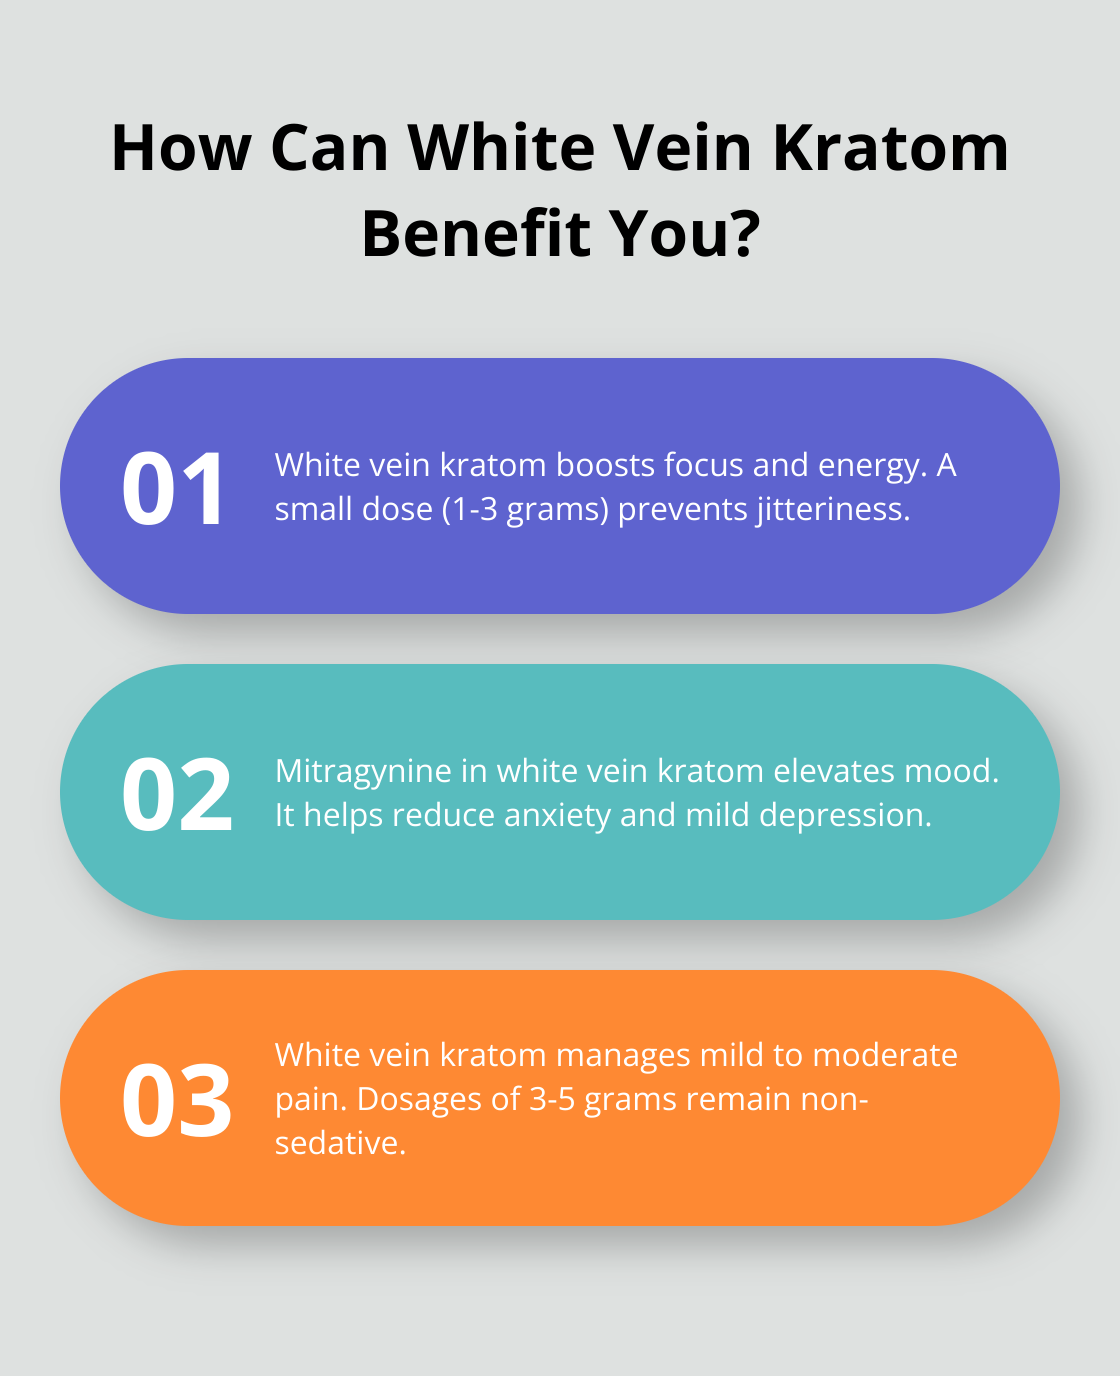 Fact - How Can White Vein Kratom Benefit You?